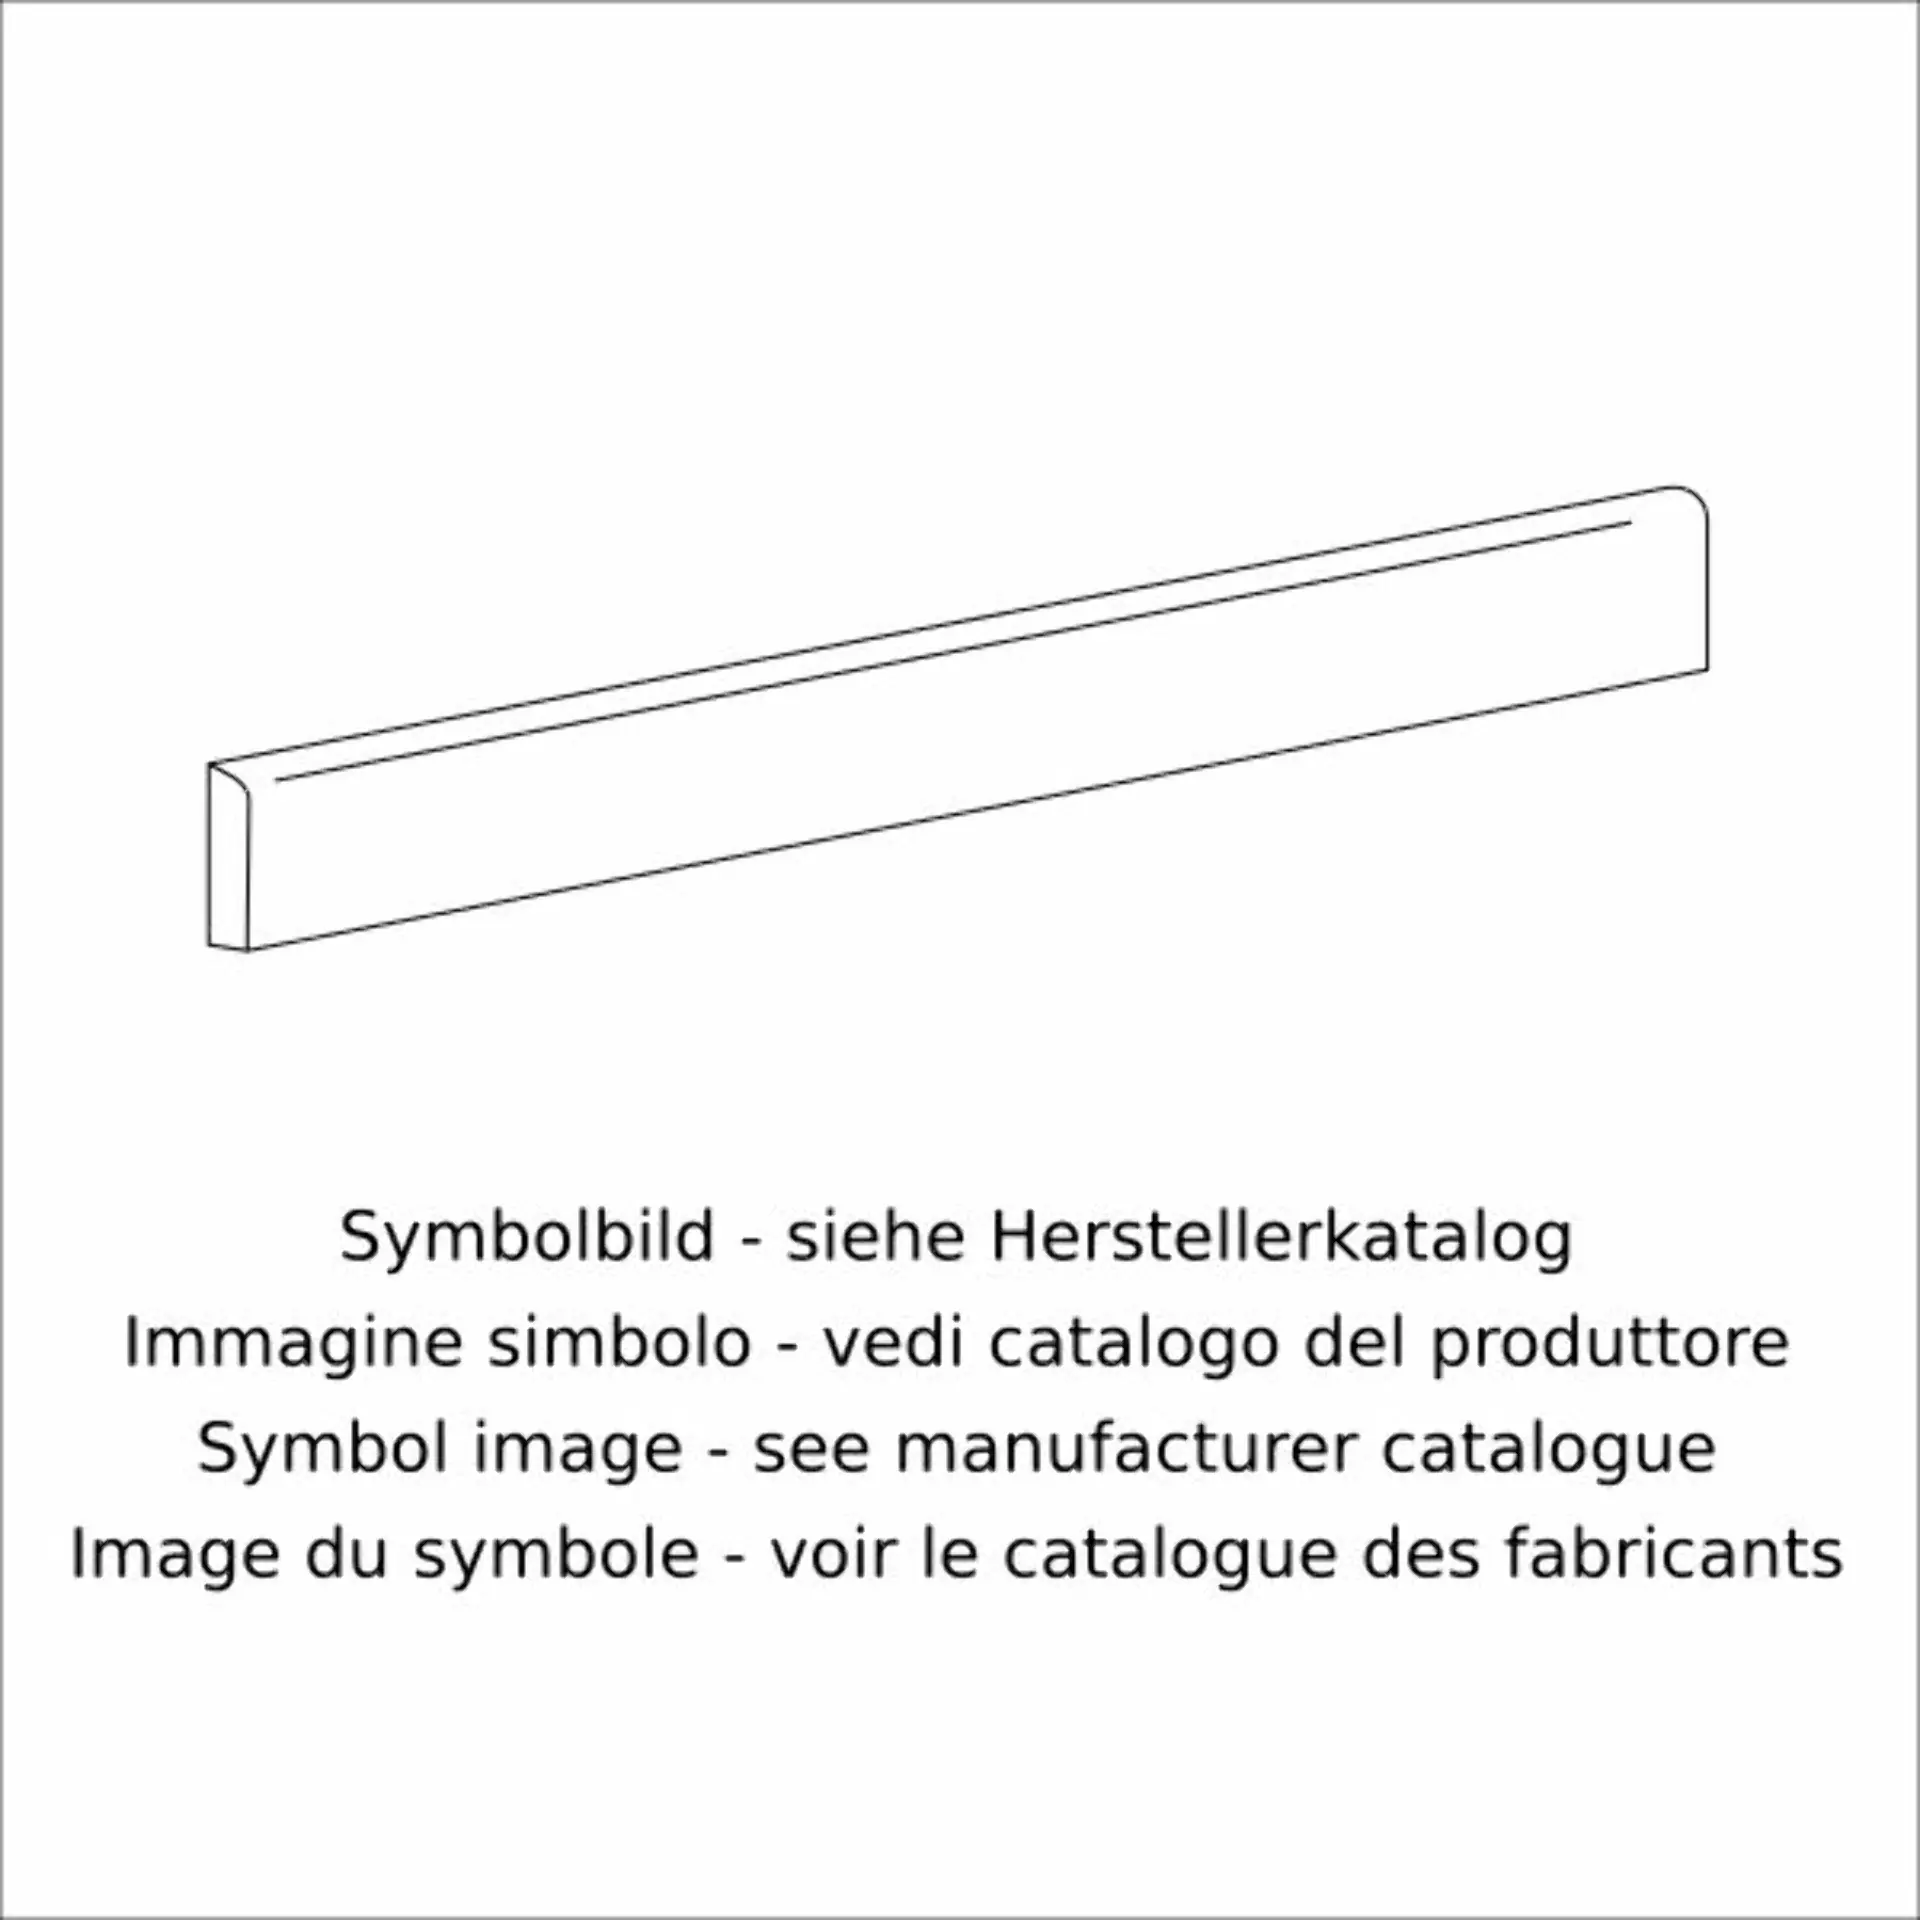 Fondovalle Keynote Pearl Natural Skirting board KEY073A 8x80cm rectified 8,5mm